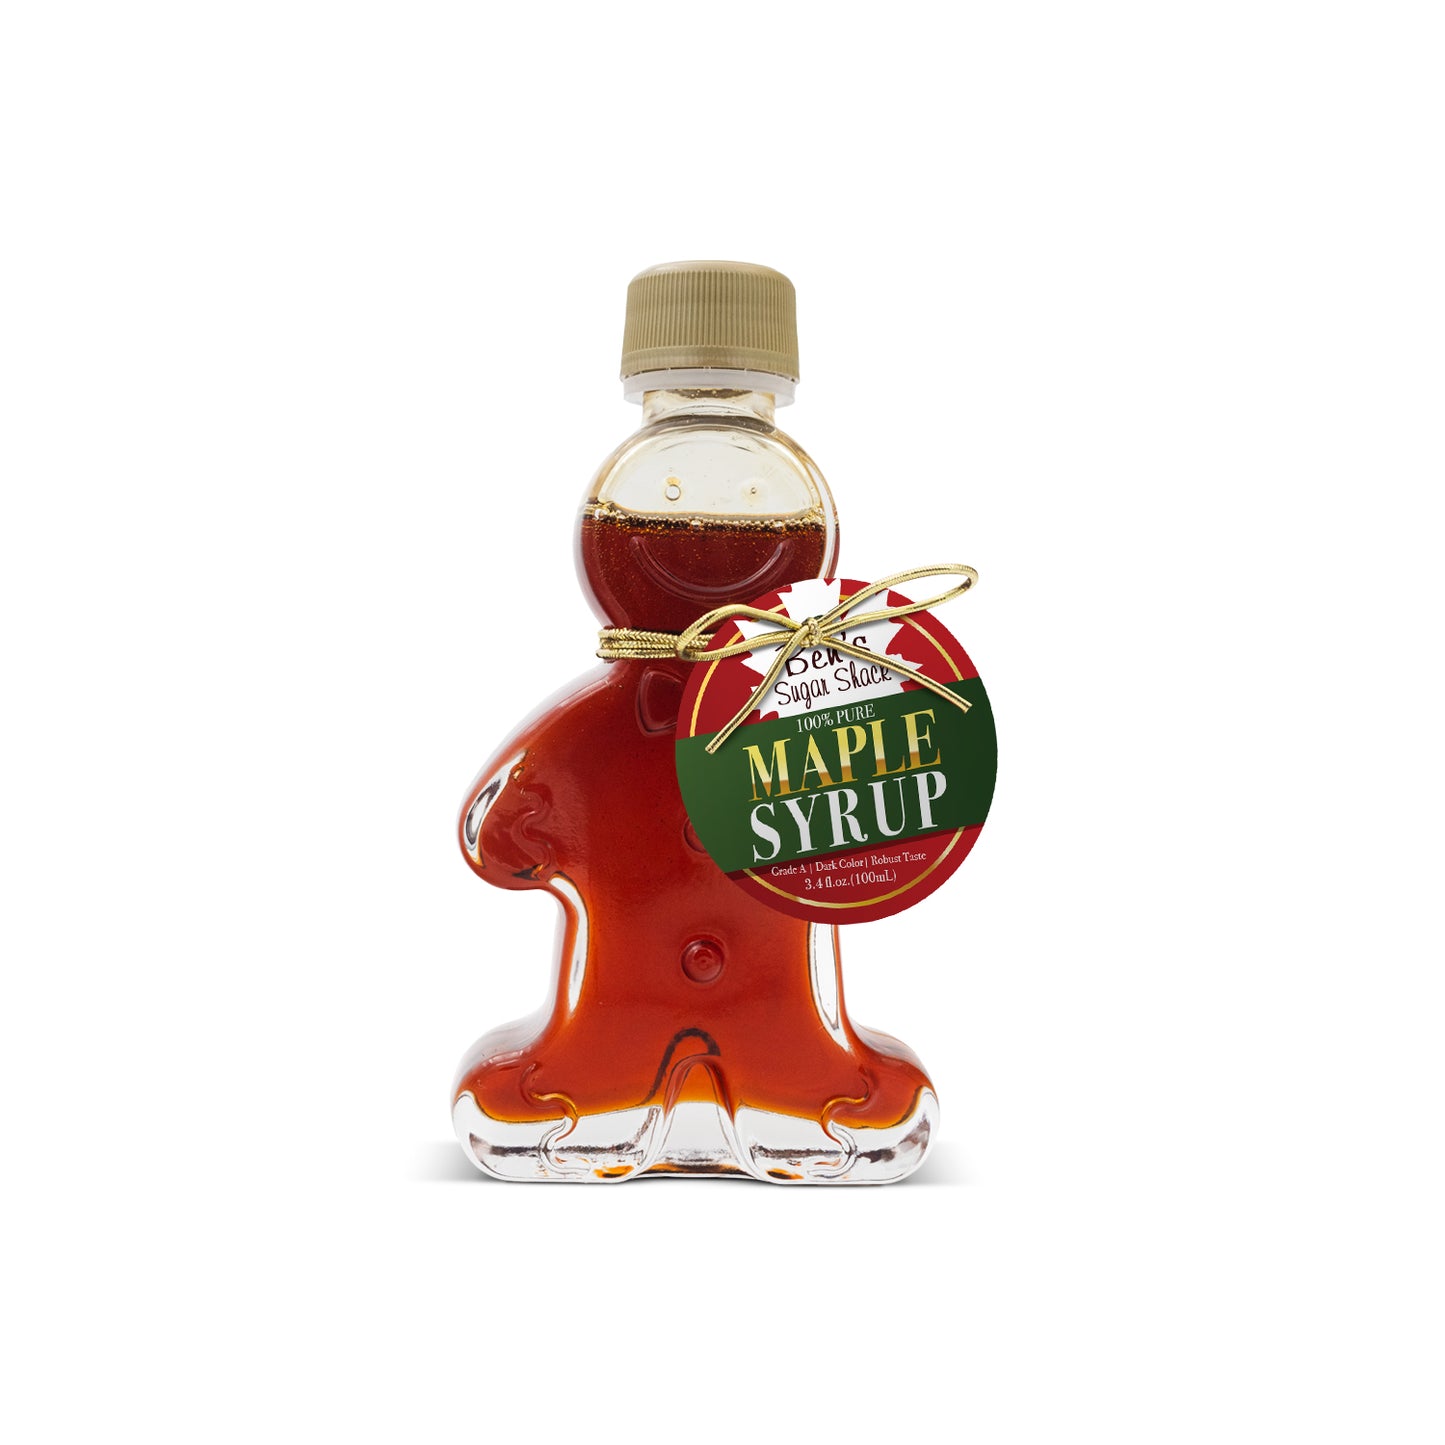 Pure Maple Syrup in Gingerbread Man Glass Bottle with Hat 3.4 oz